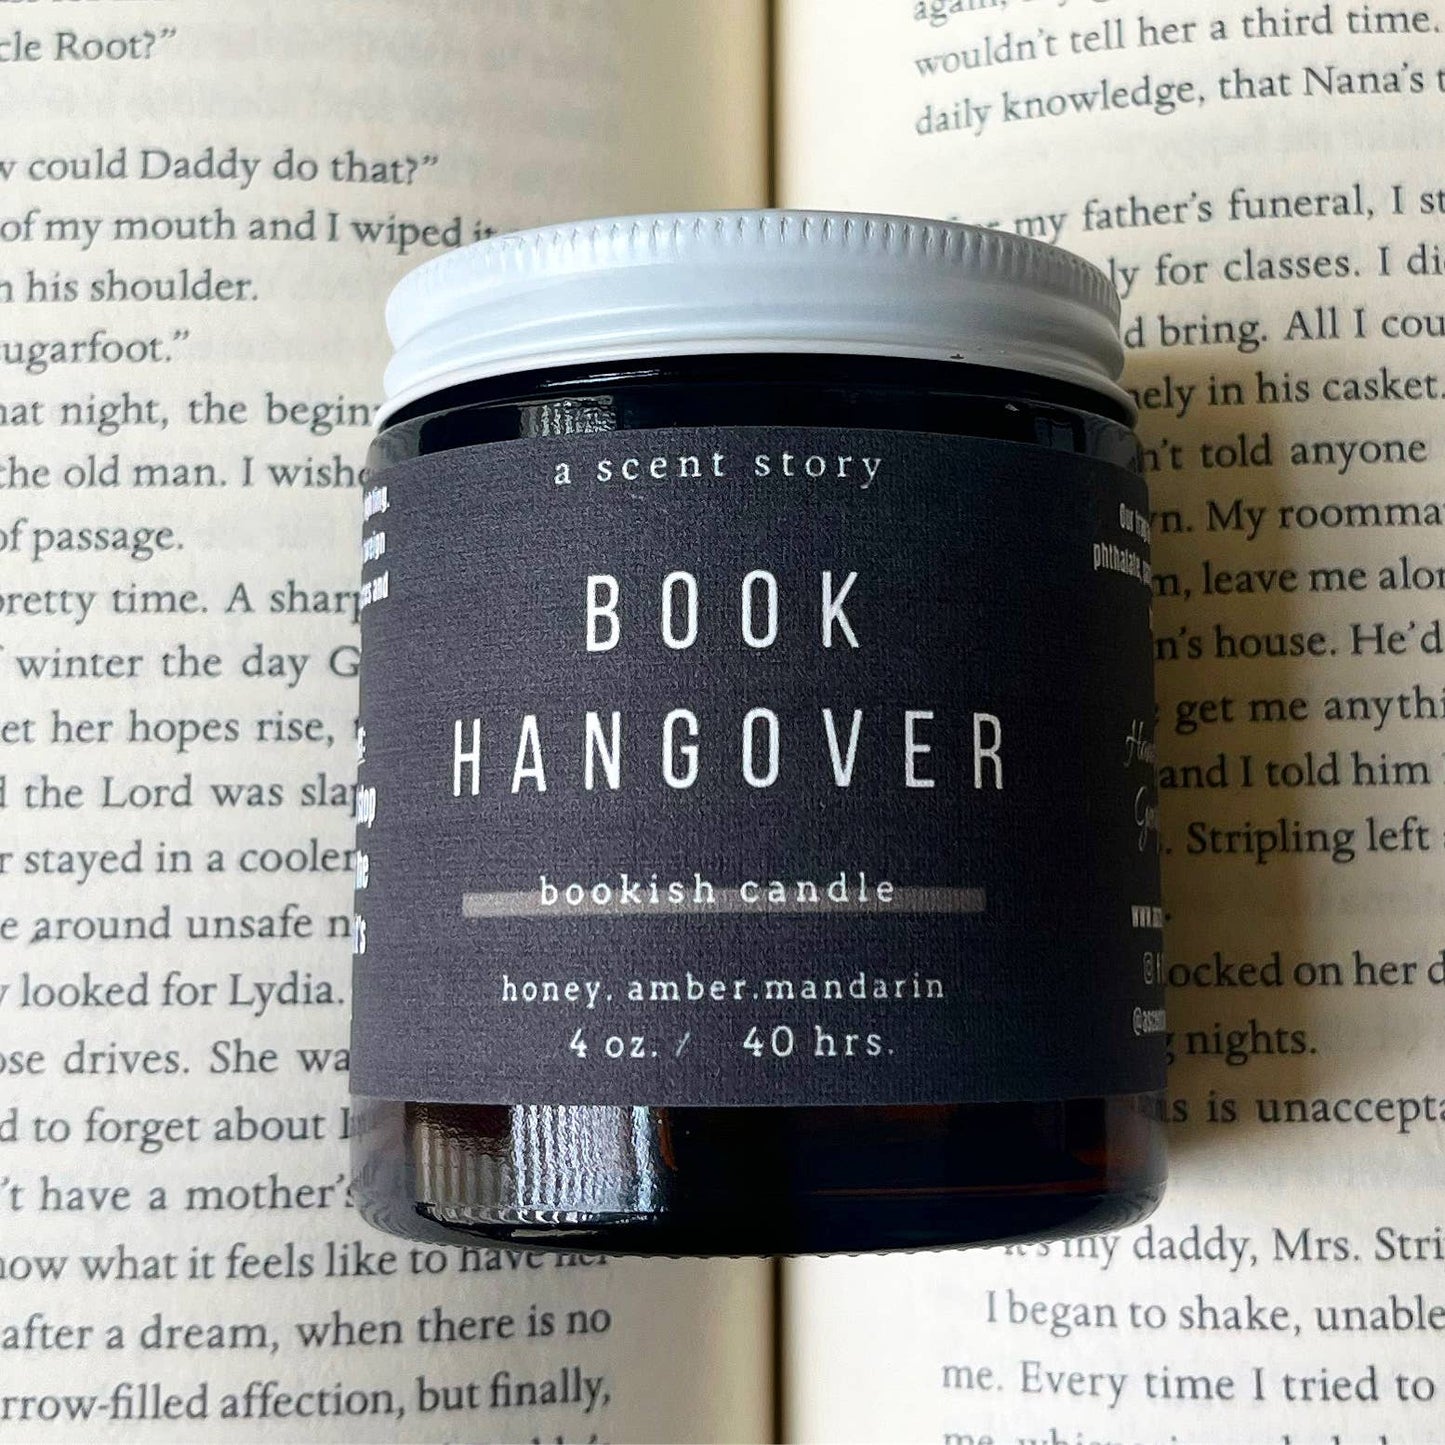 A Scent Story Candle Co - Book Hangover | Bookish Candle - Honey, Amber + Mandarin 4oz